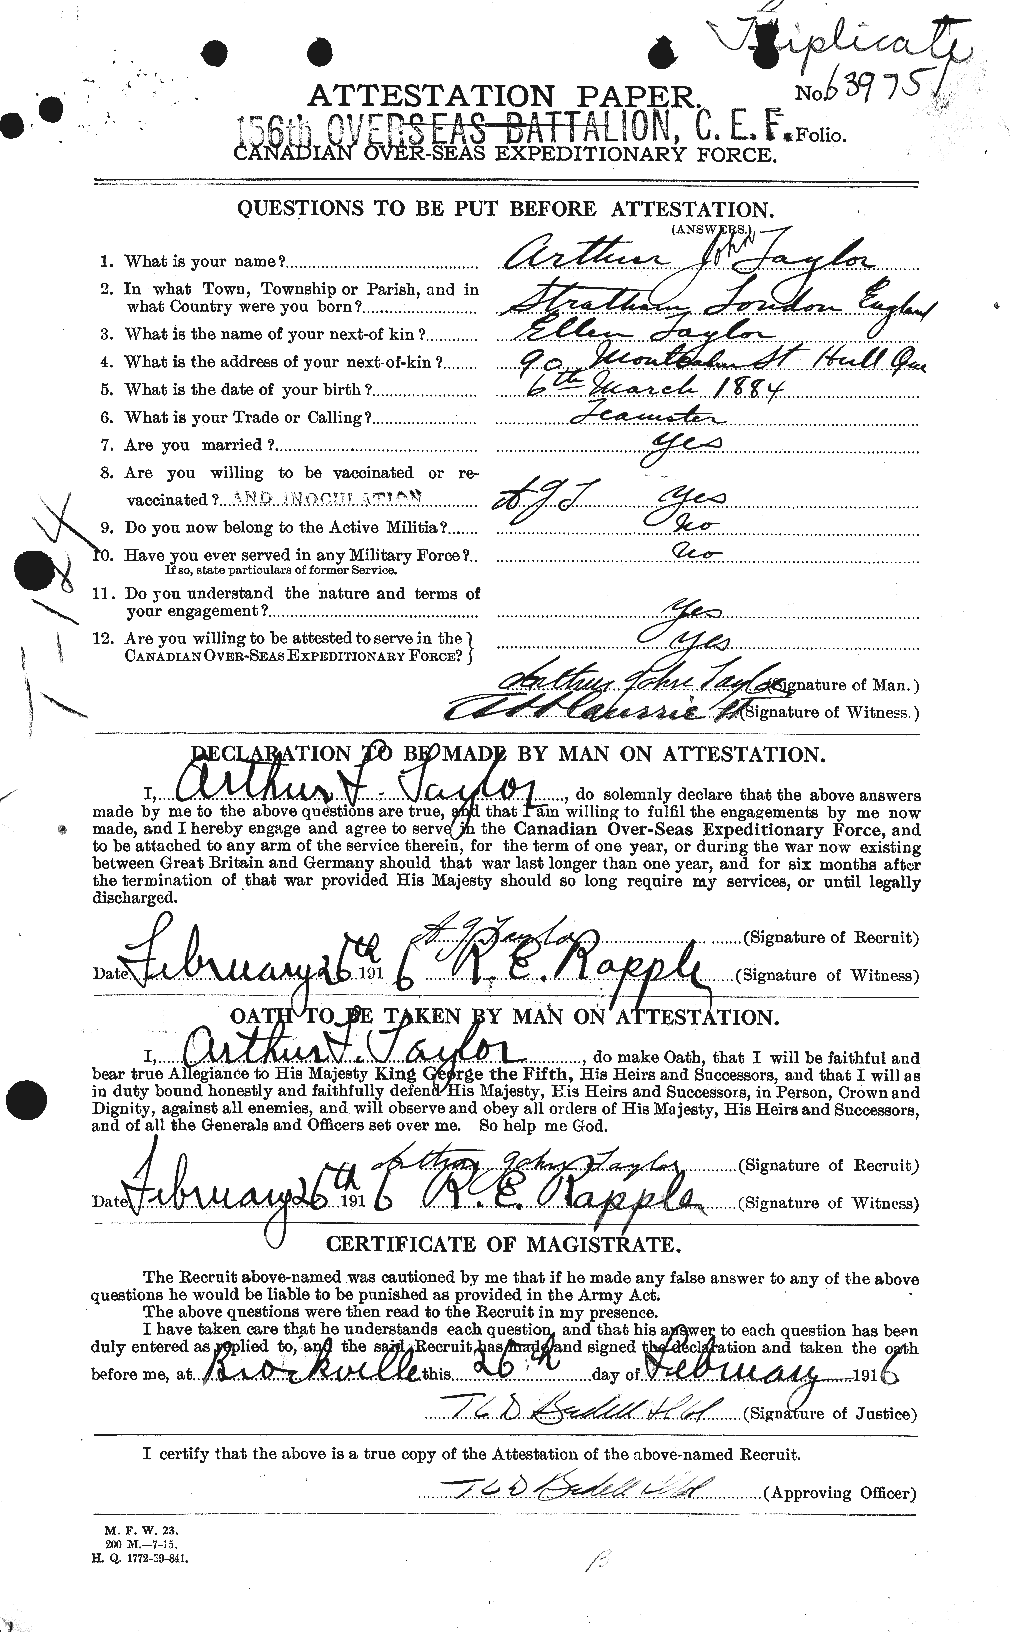 Personnel Records of the First World War - CEF 626733a